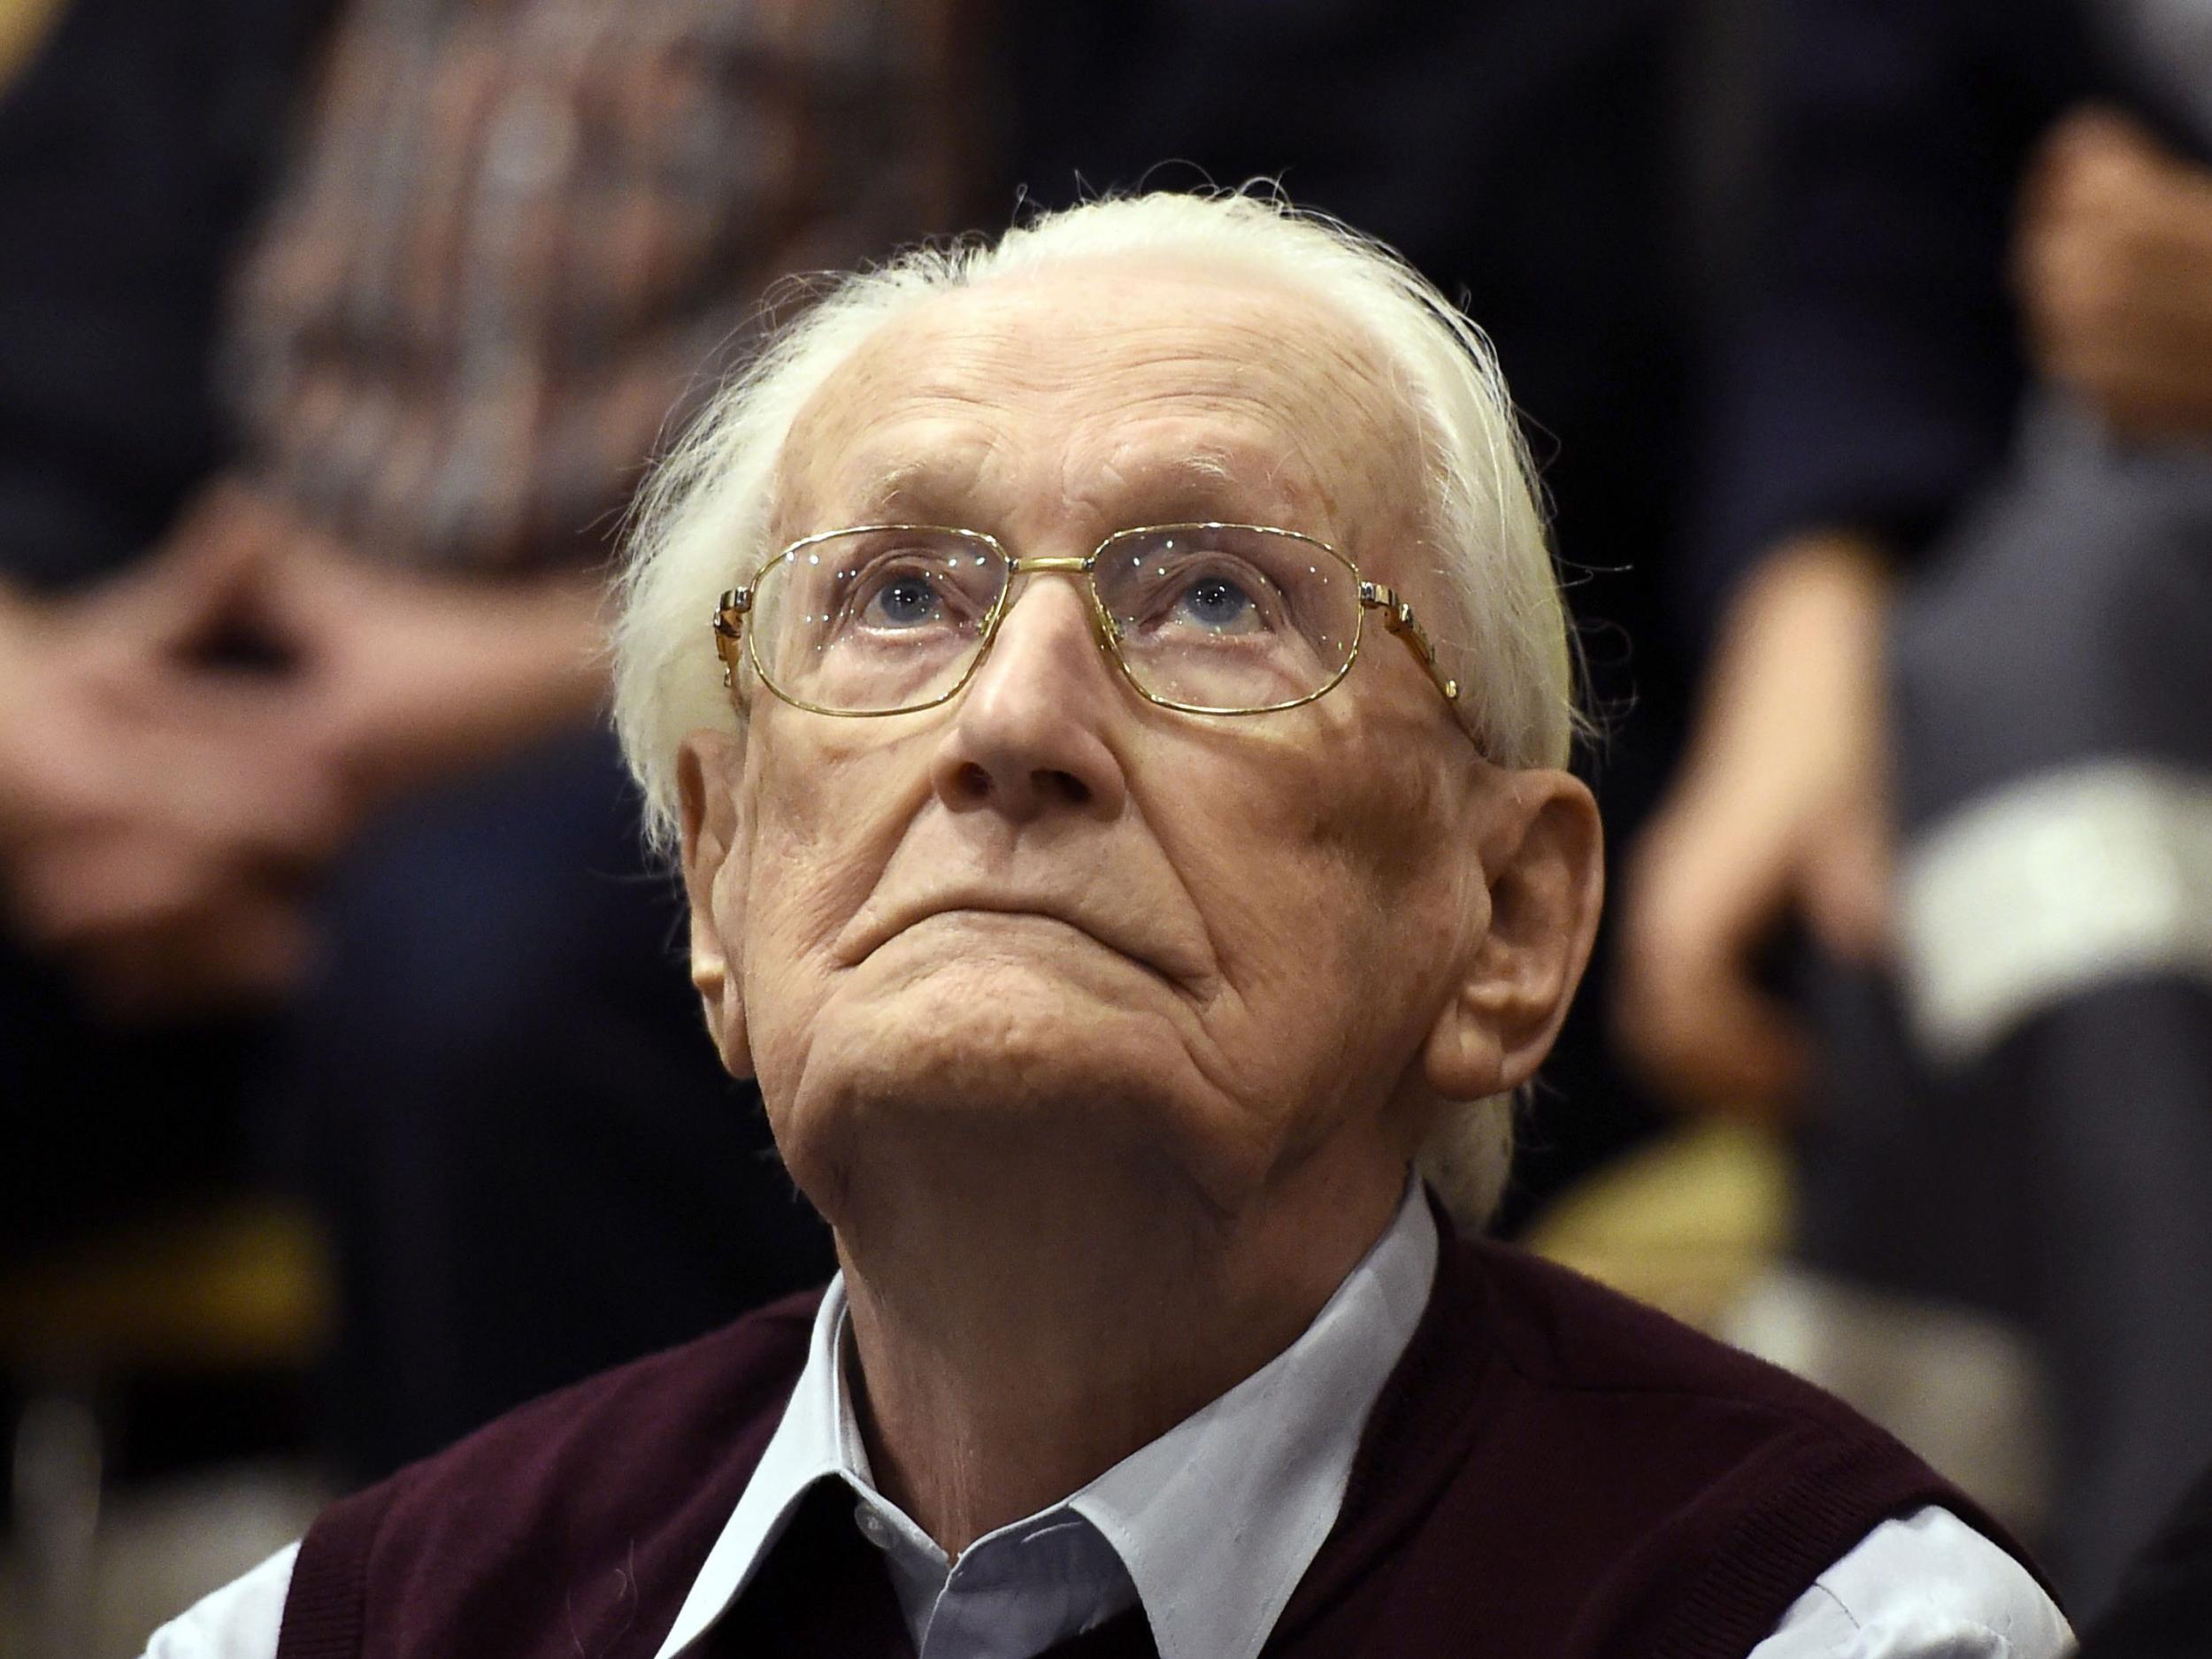 Former SS officer Oskar Groening listens to the verdict of his trial at court in Lueneburg, northern Germany, in 2015